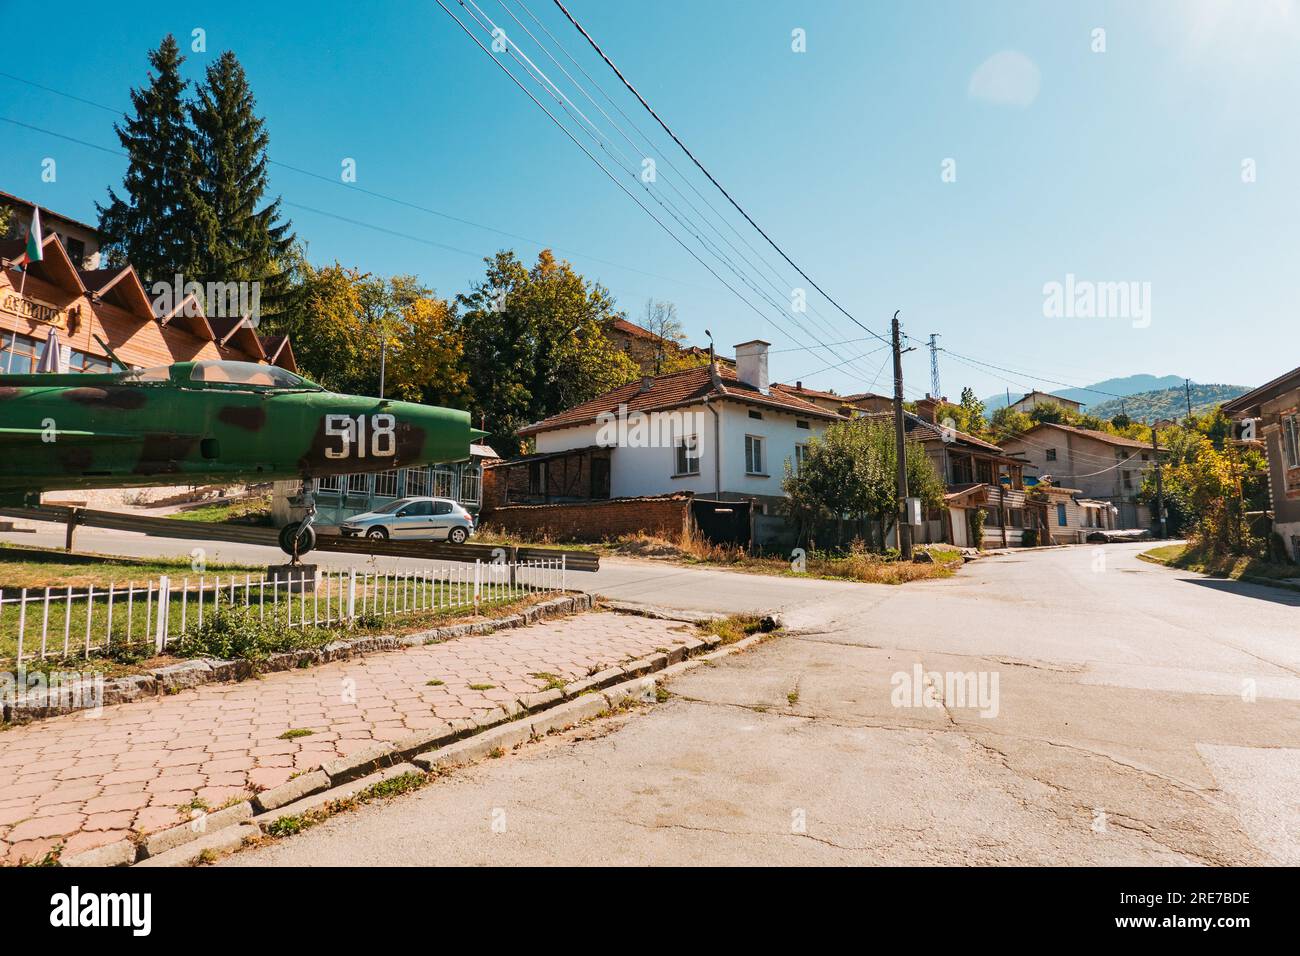 Mikoyan-Gurevich MiG-21 Fishbed C on public display in the small village of Raduil, rural Bulgaria Stock Photo